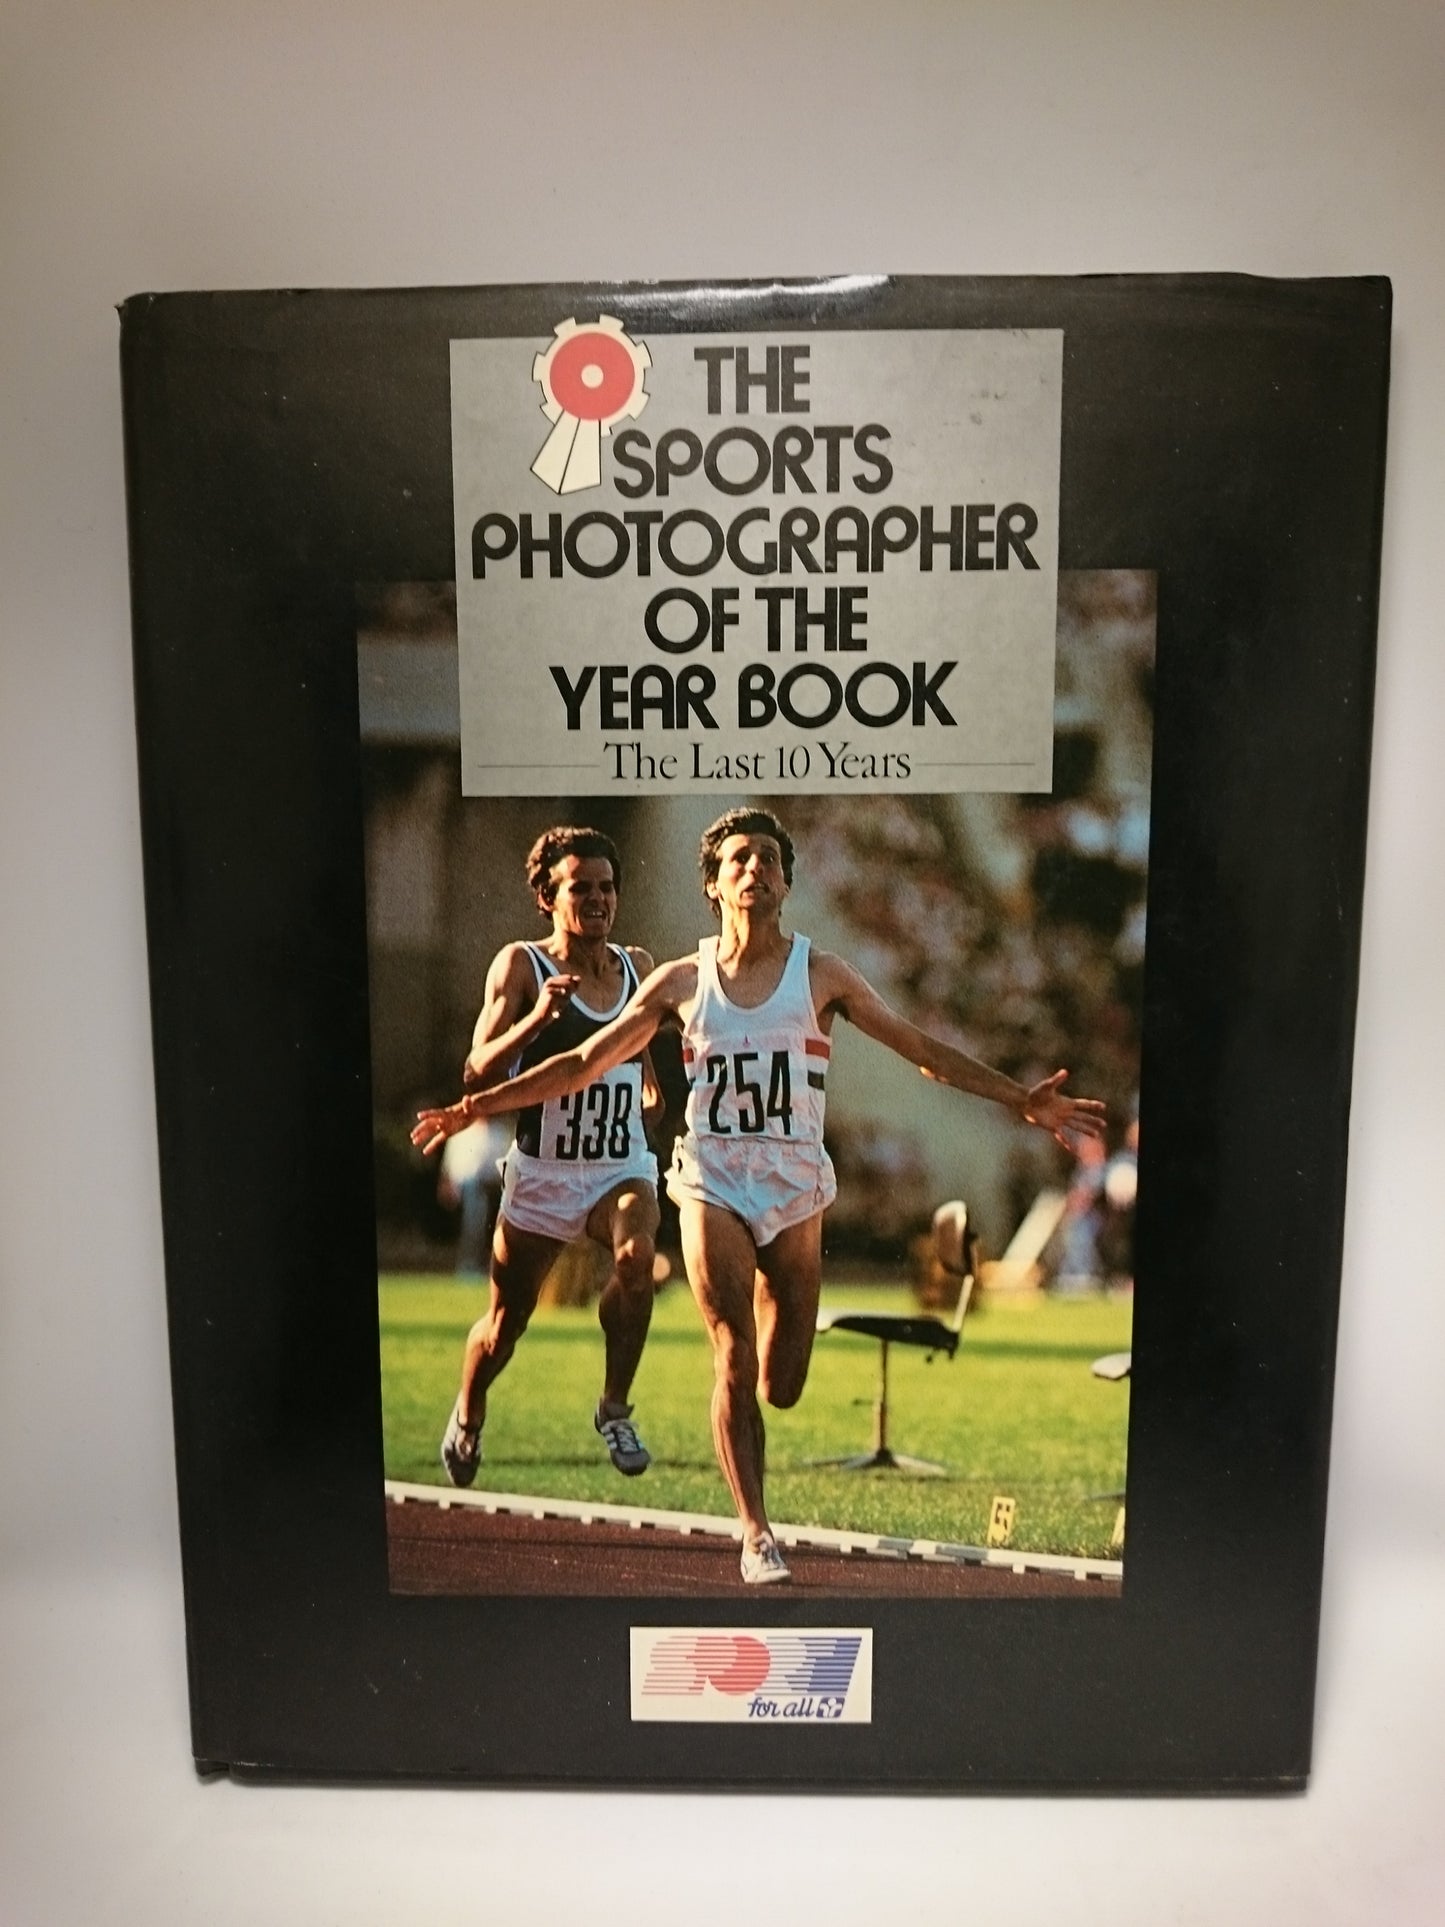 The Sports Photographer of the Year Book